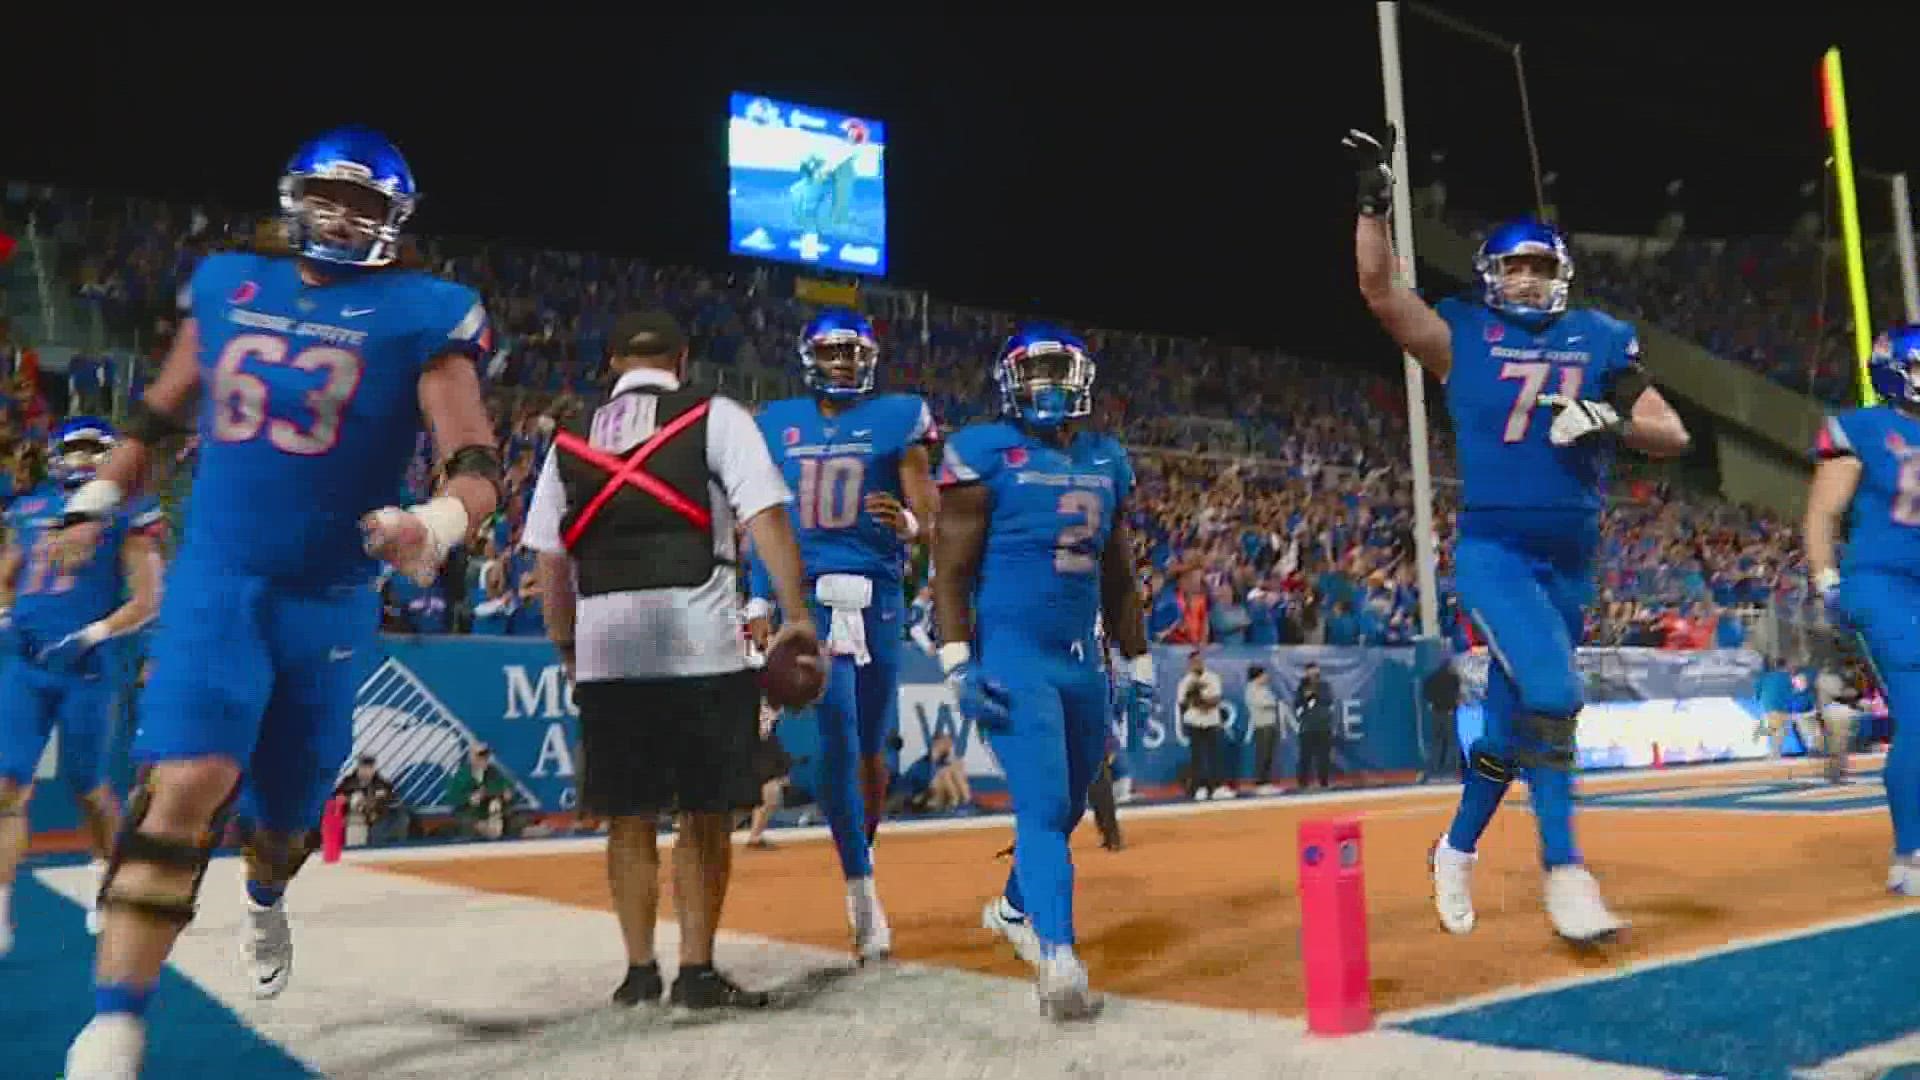 Boise State found its footing and slammed the gas pedal in the second half Friday night on The Blue, coming back from 13-0 to defeat San Diego State 35-13.